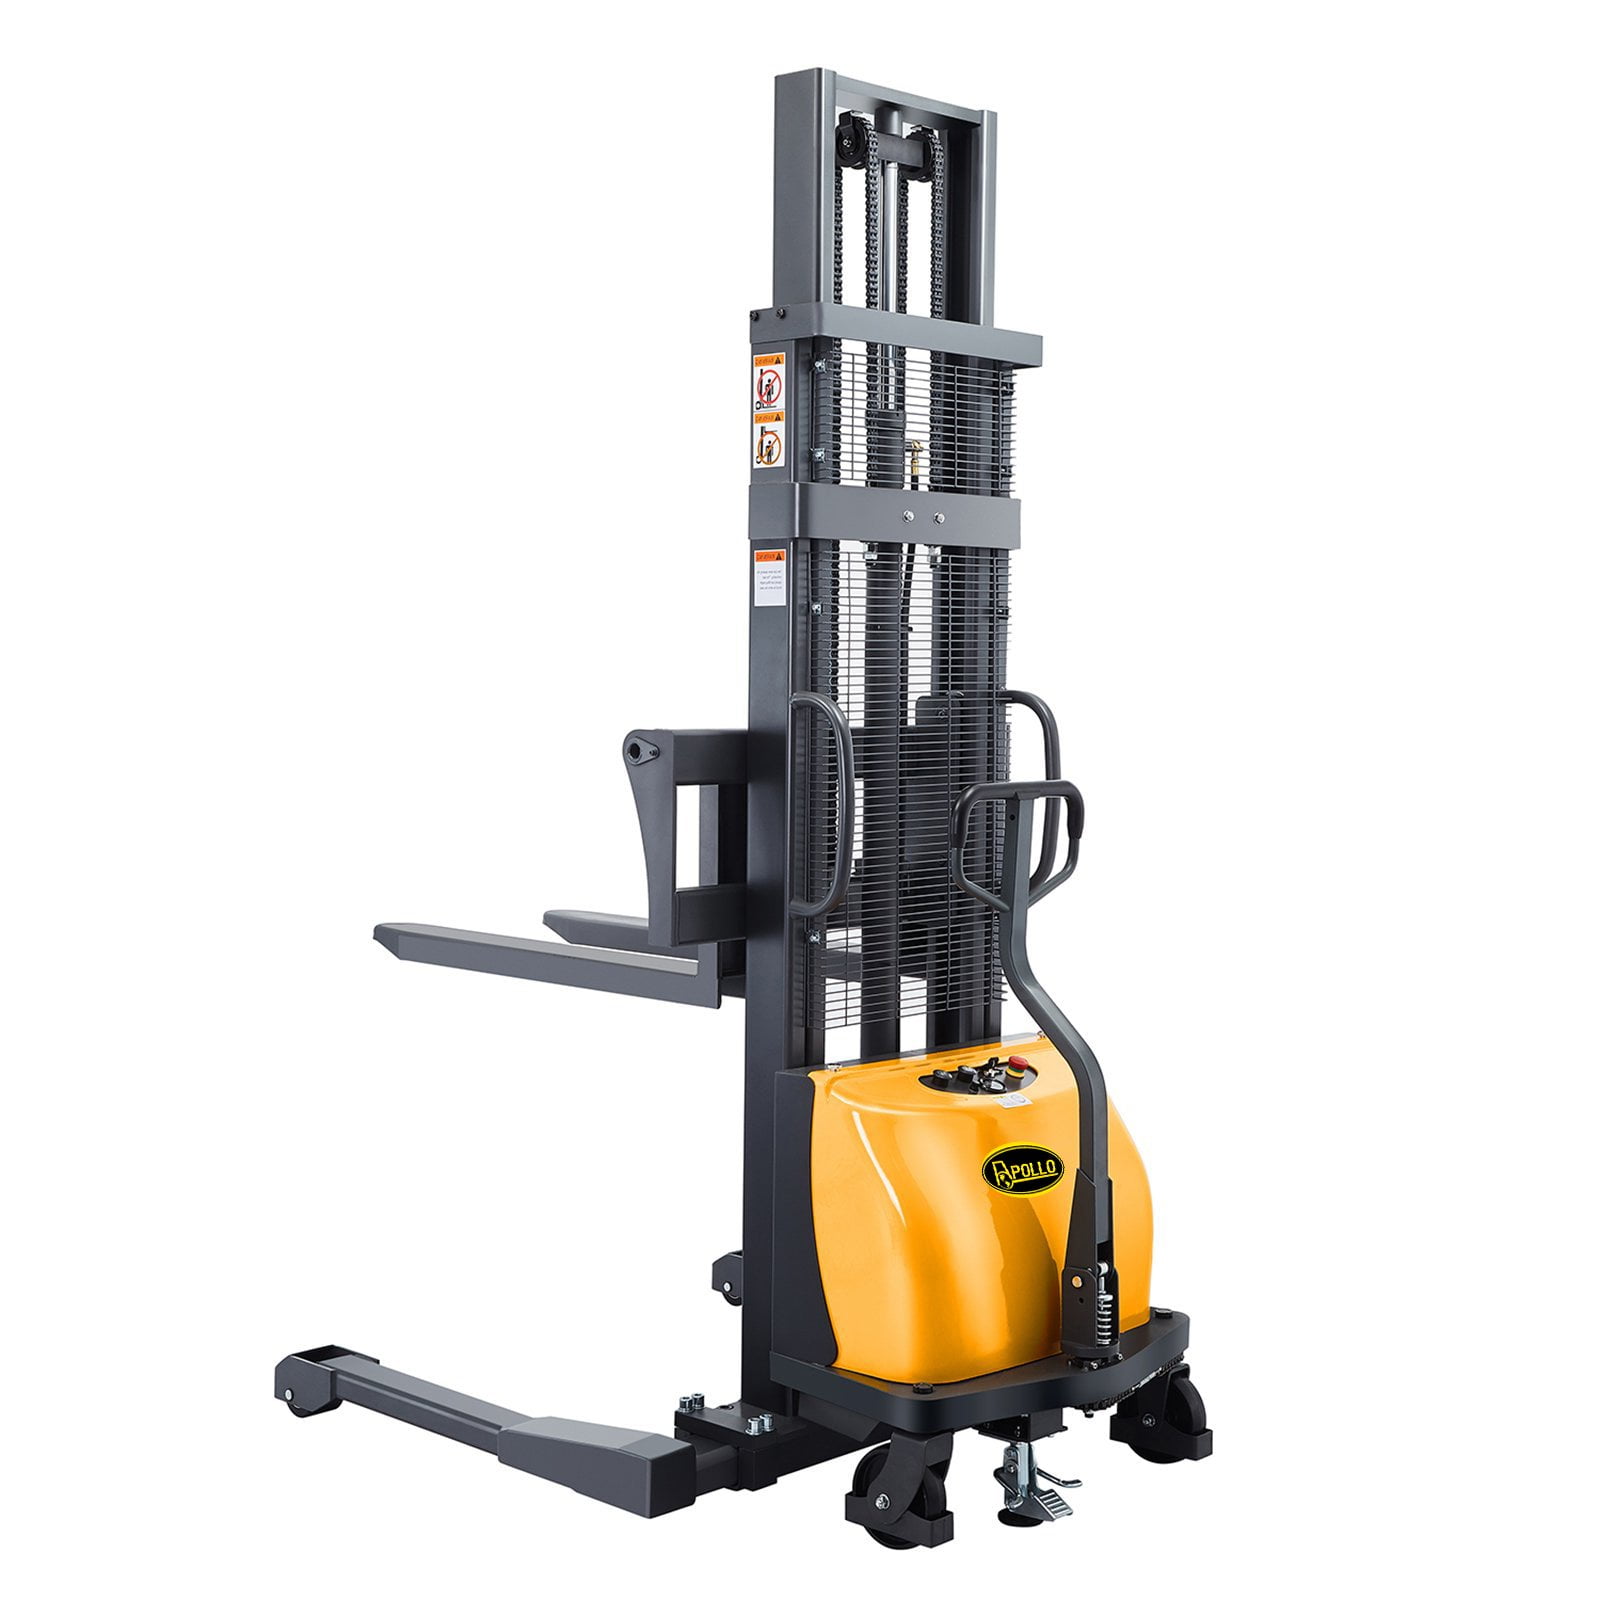 Aequanta Semi-Electric Pallet Jack Forklift Cross-Legs Straddle High Lift Stacker 2200lbs Capacity 63 Lifting Height with Adjustable Forks 